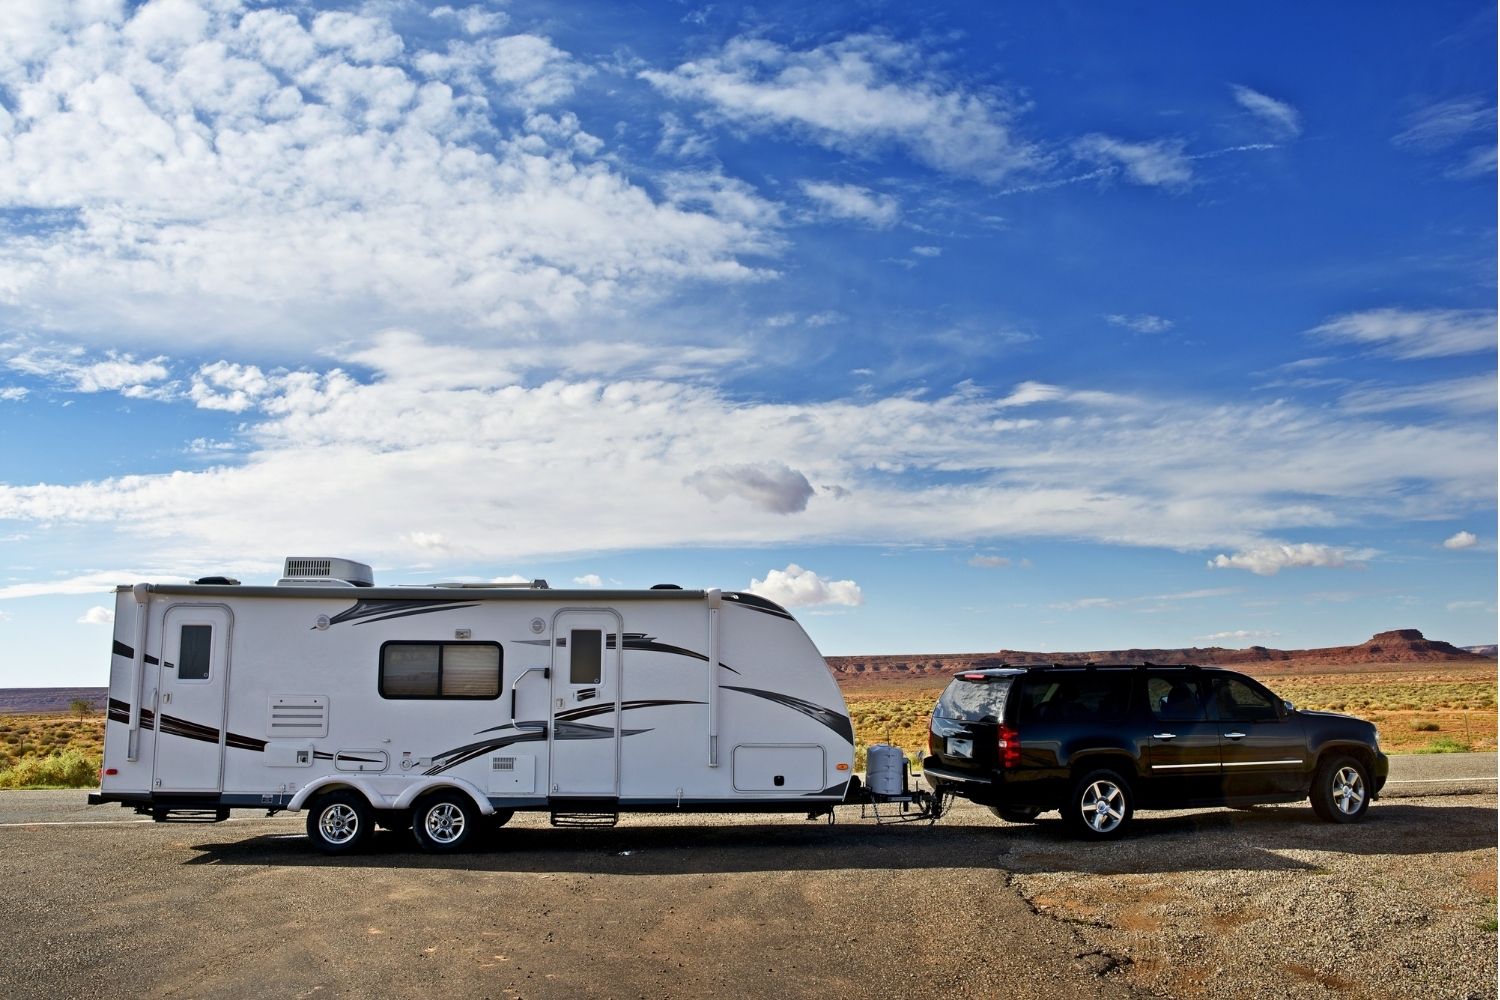 Can a Tahoe Pull a Camper?